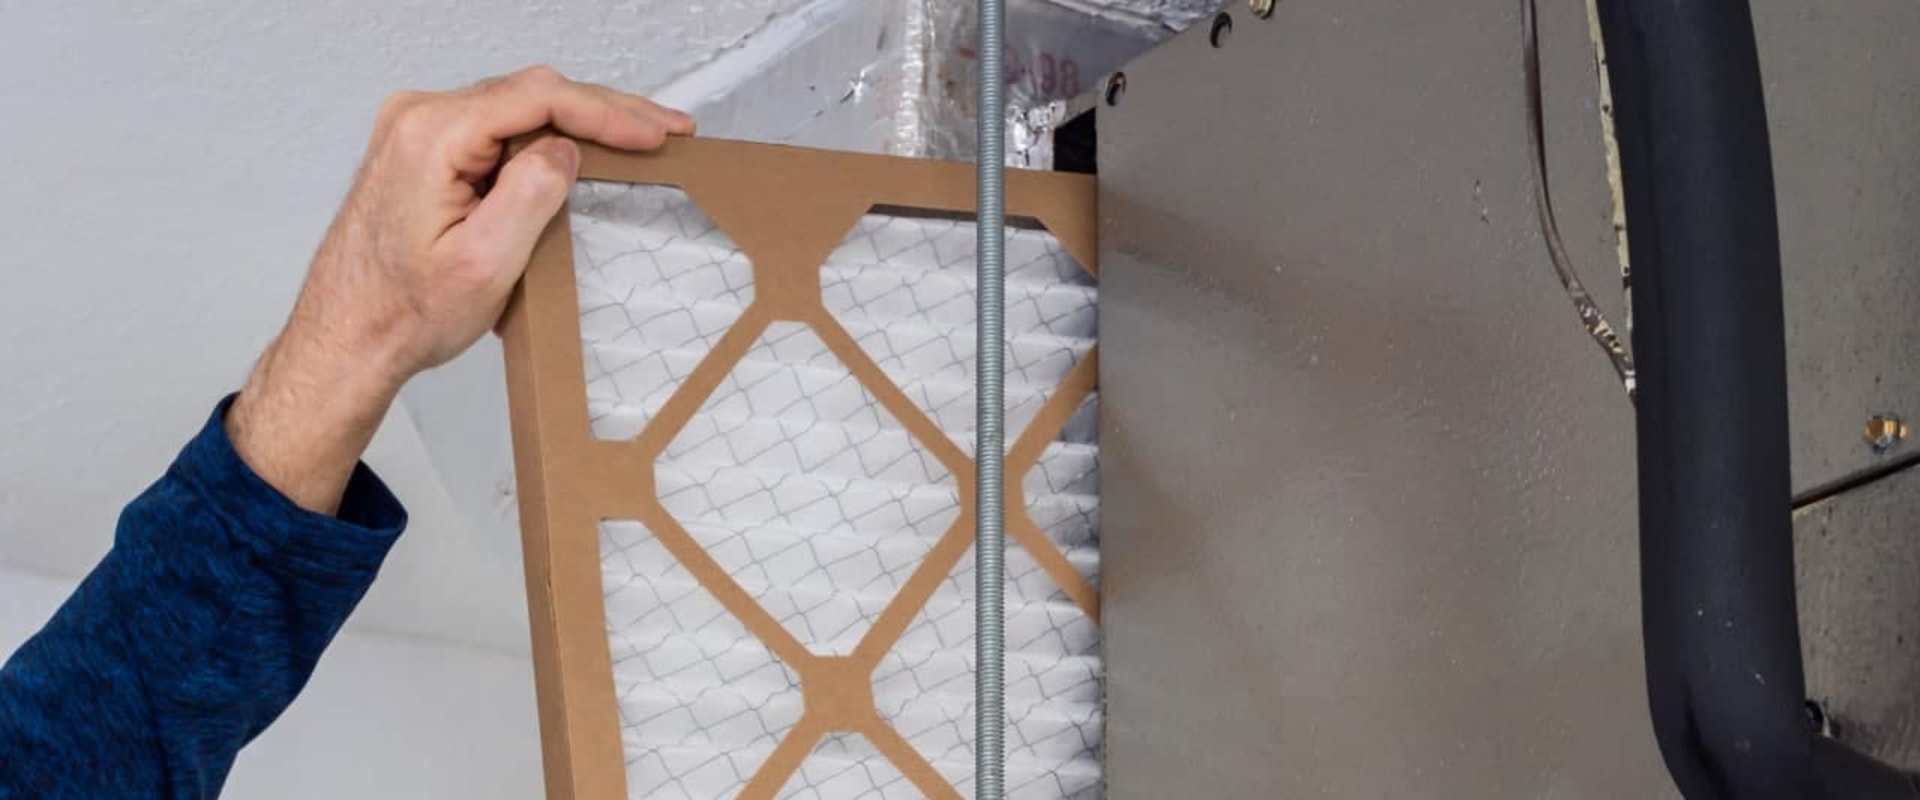 How Often to Change Furnace Filter? Why It Matters?